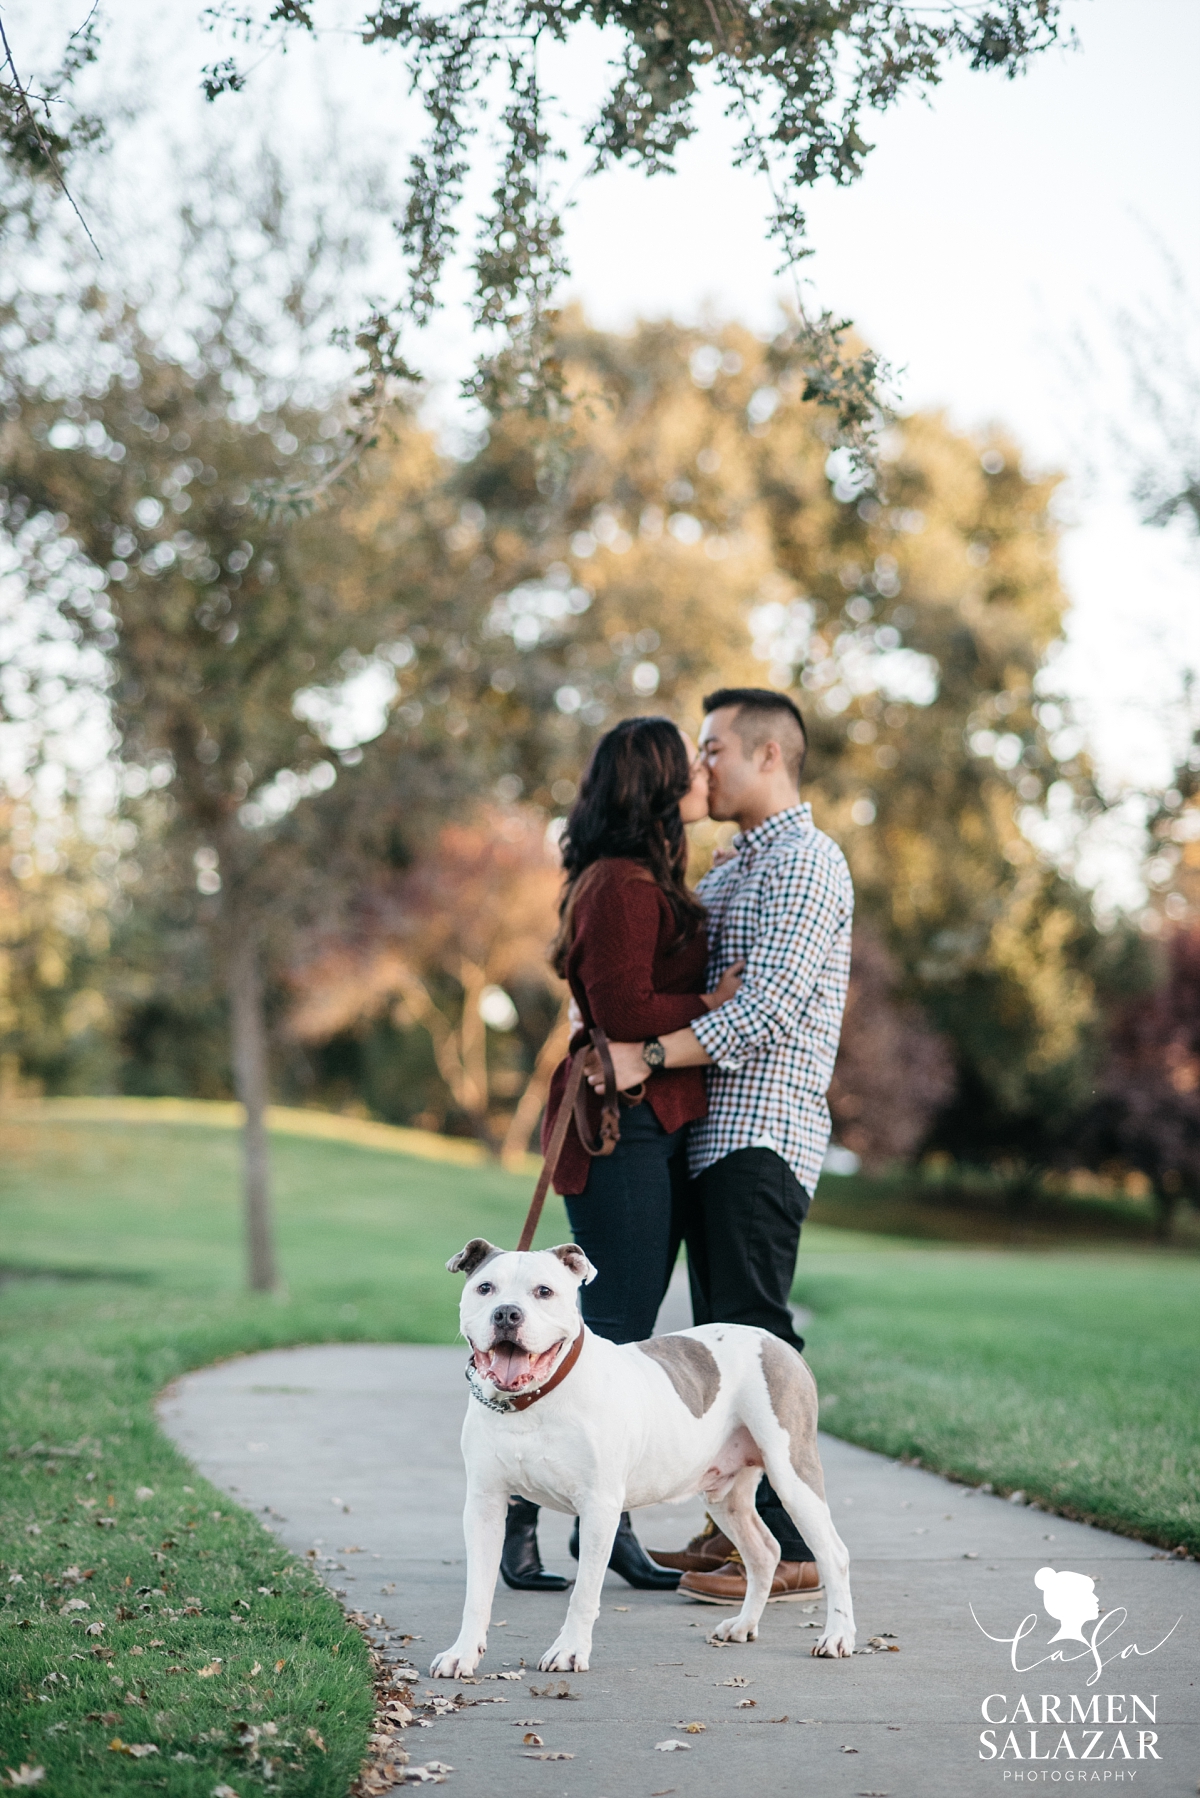 Engagement sessions with cute dogs - Carmen Salazar